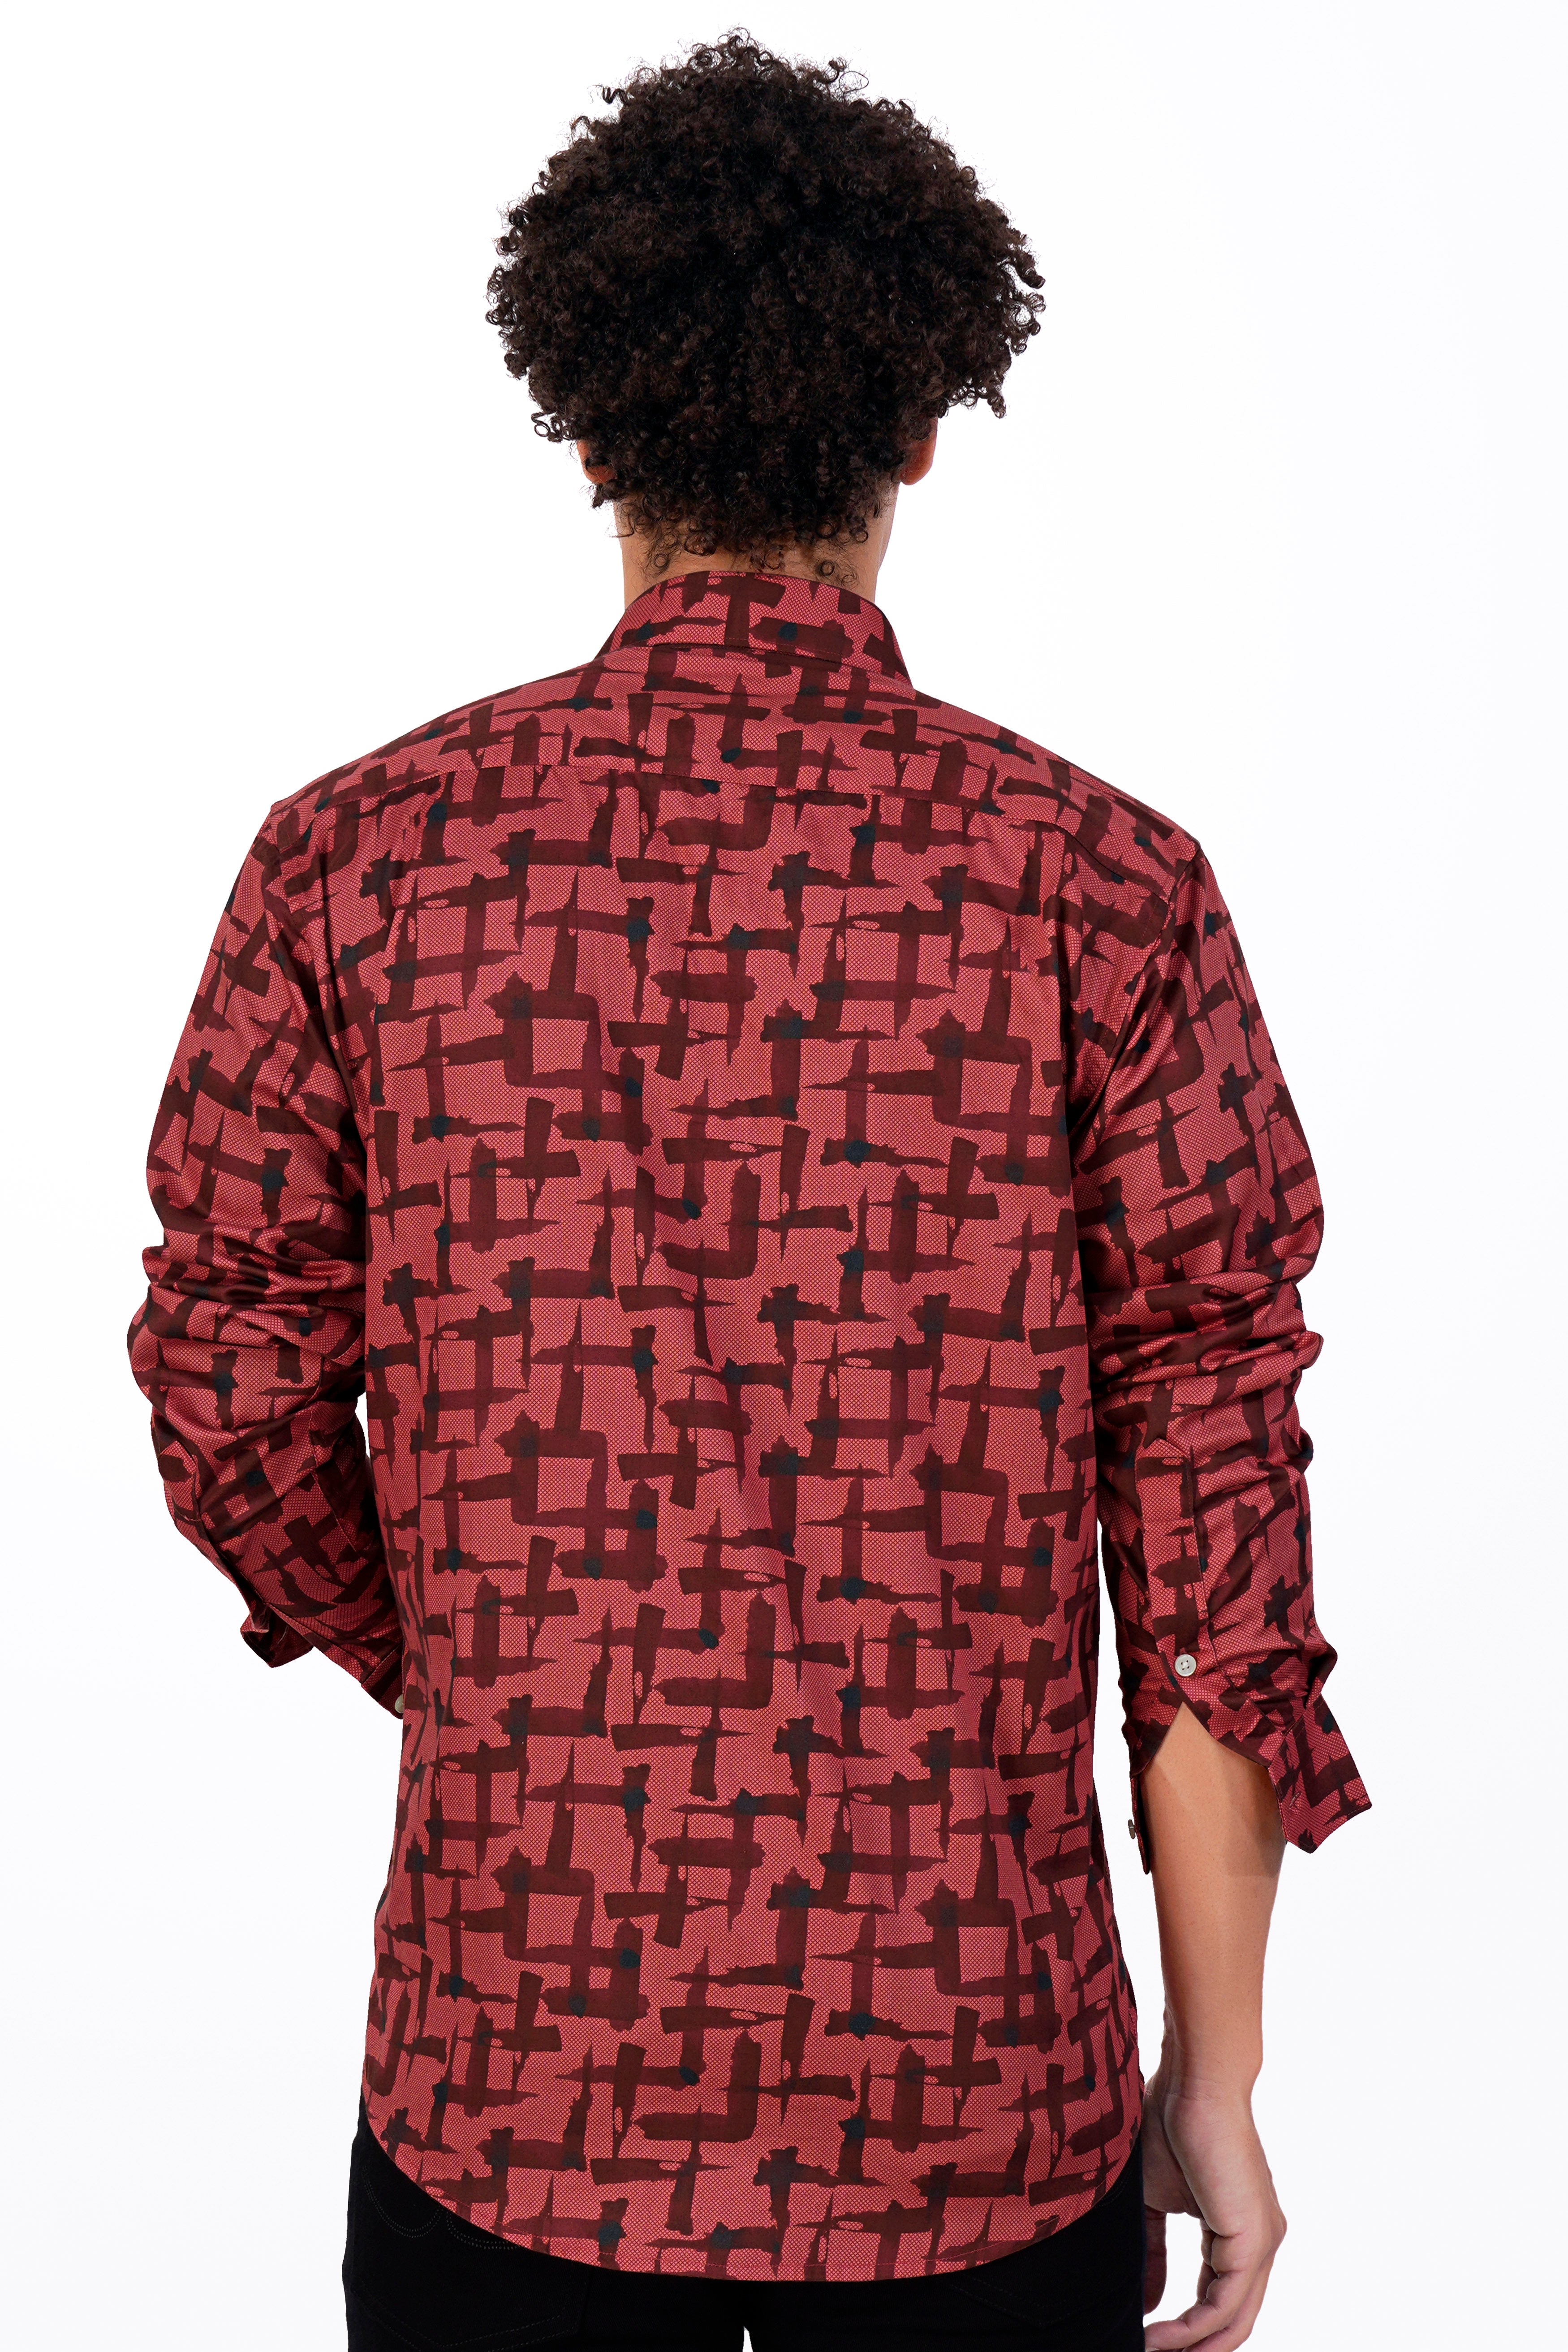 Cardinal Red Printed With Funky Patch Work Super Soft Premium Cotton Shirt 8190-E200-38, 8190-E200-H-38, 8190-E200-39, 8190-E200-H-39, 8190-E200-40, 8190-E200-H-40, 8190-E200-42, 8190-E200-H-42, 8190-E200-44, 8190-E200-H-44, 8190-E200-46, 8190-E200-H-46, 8190-E200-48, 8190-E200-H-48, 8190-E200-50, 8190-E200-H-50, 8190-E200-52, 8190-E200-H-52